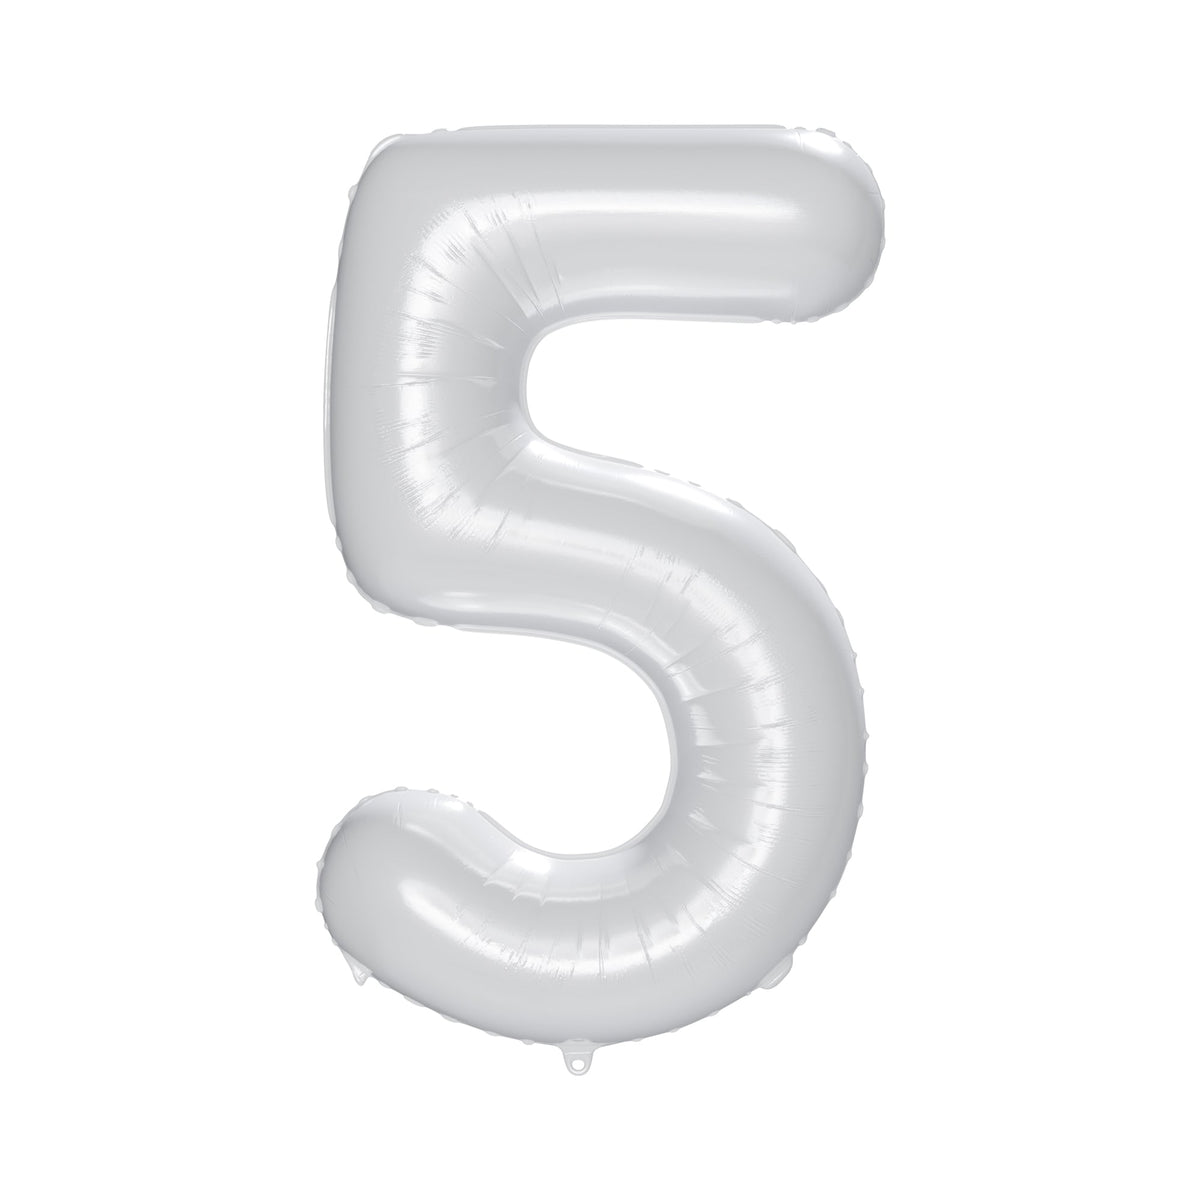 PARTYGRAM Balloons Light Grey Number 5 Foil Balloon, Frosty White Matte Finish, 34 Inches 810077658192